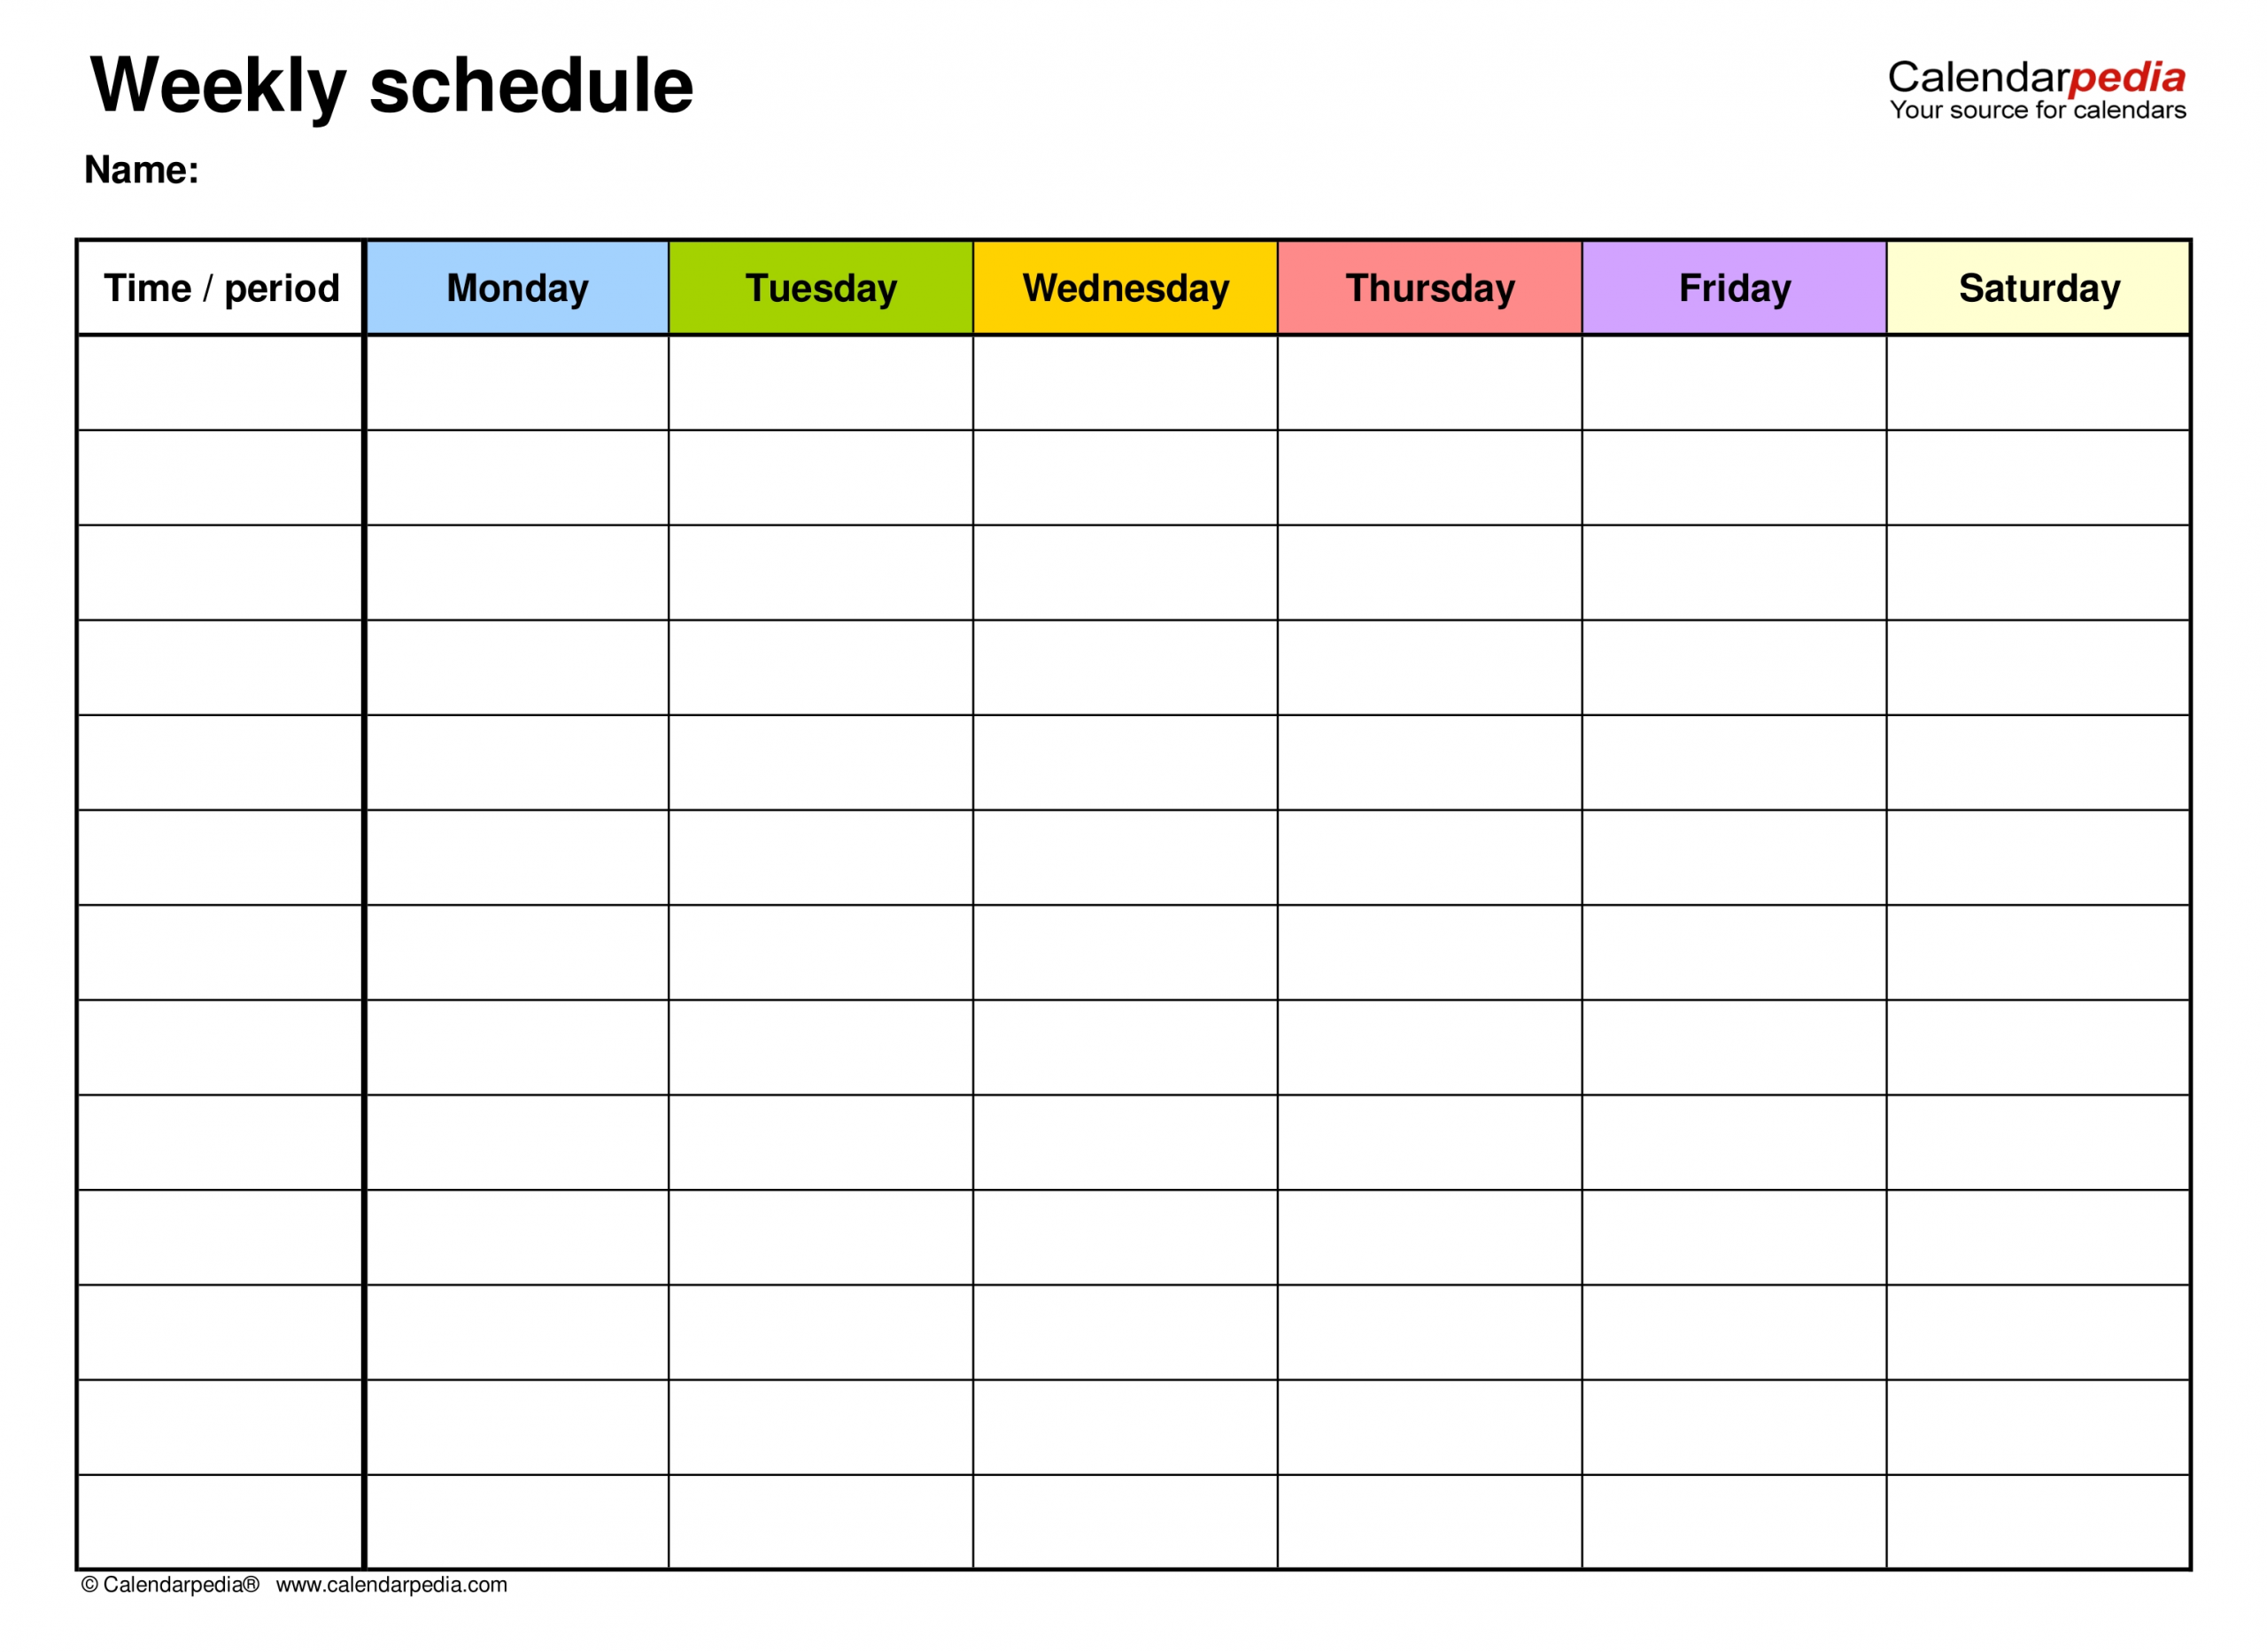 Free Weekly Schedules For Pdf - 18 Templates Week Calendar Template Pdf